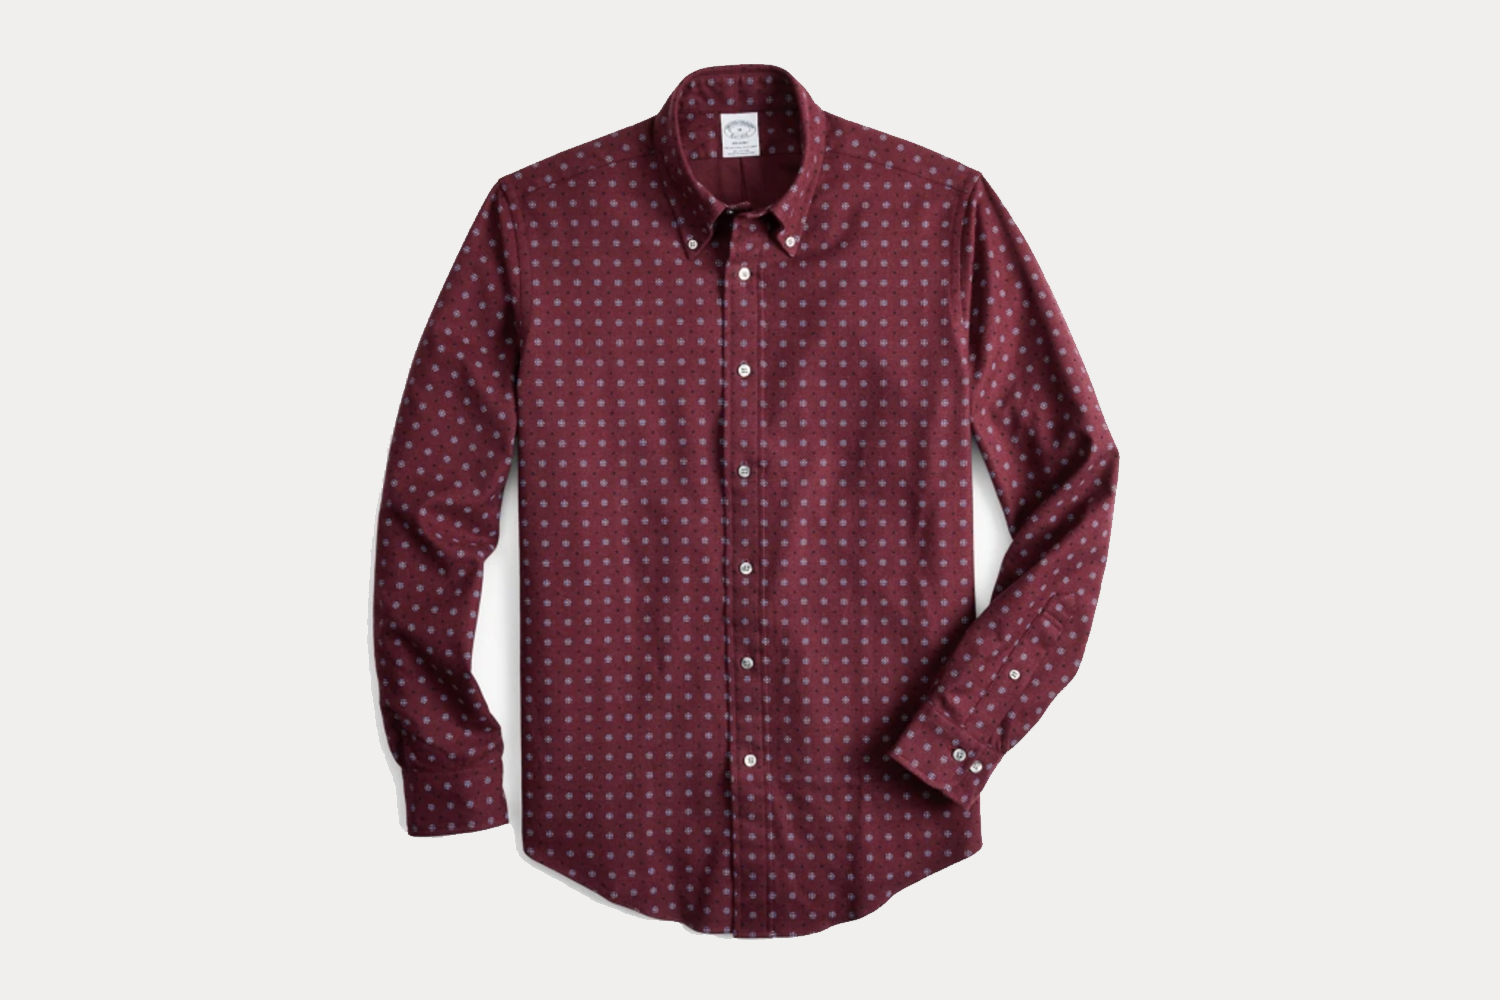 Brooks Brothers flannel shirt